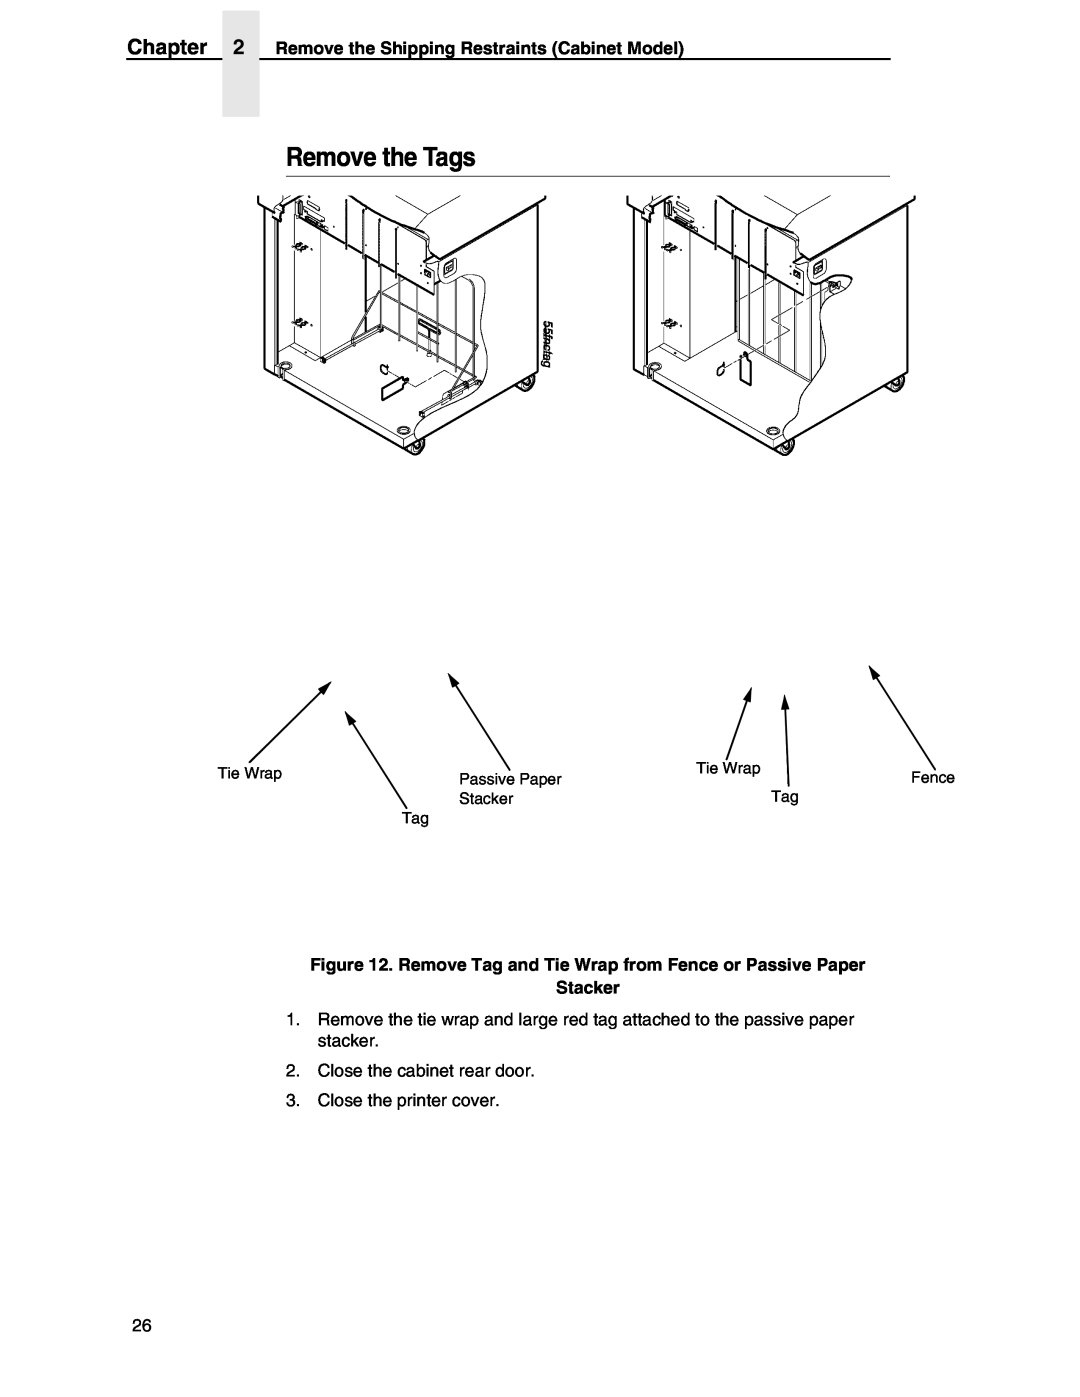 Compaq P5000 Series setup guide Remove the Tags, Remove Tag and Tie Wrap from Fence or Passive Paper, Stacker 